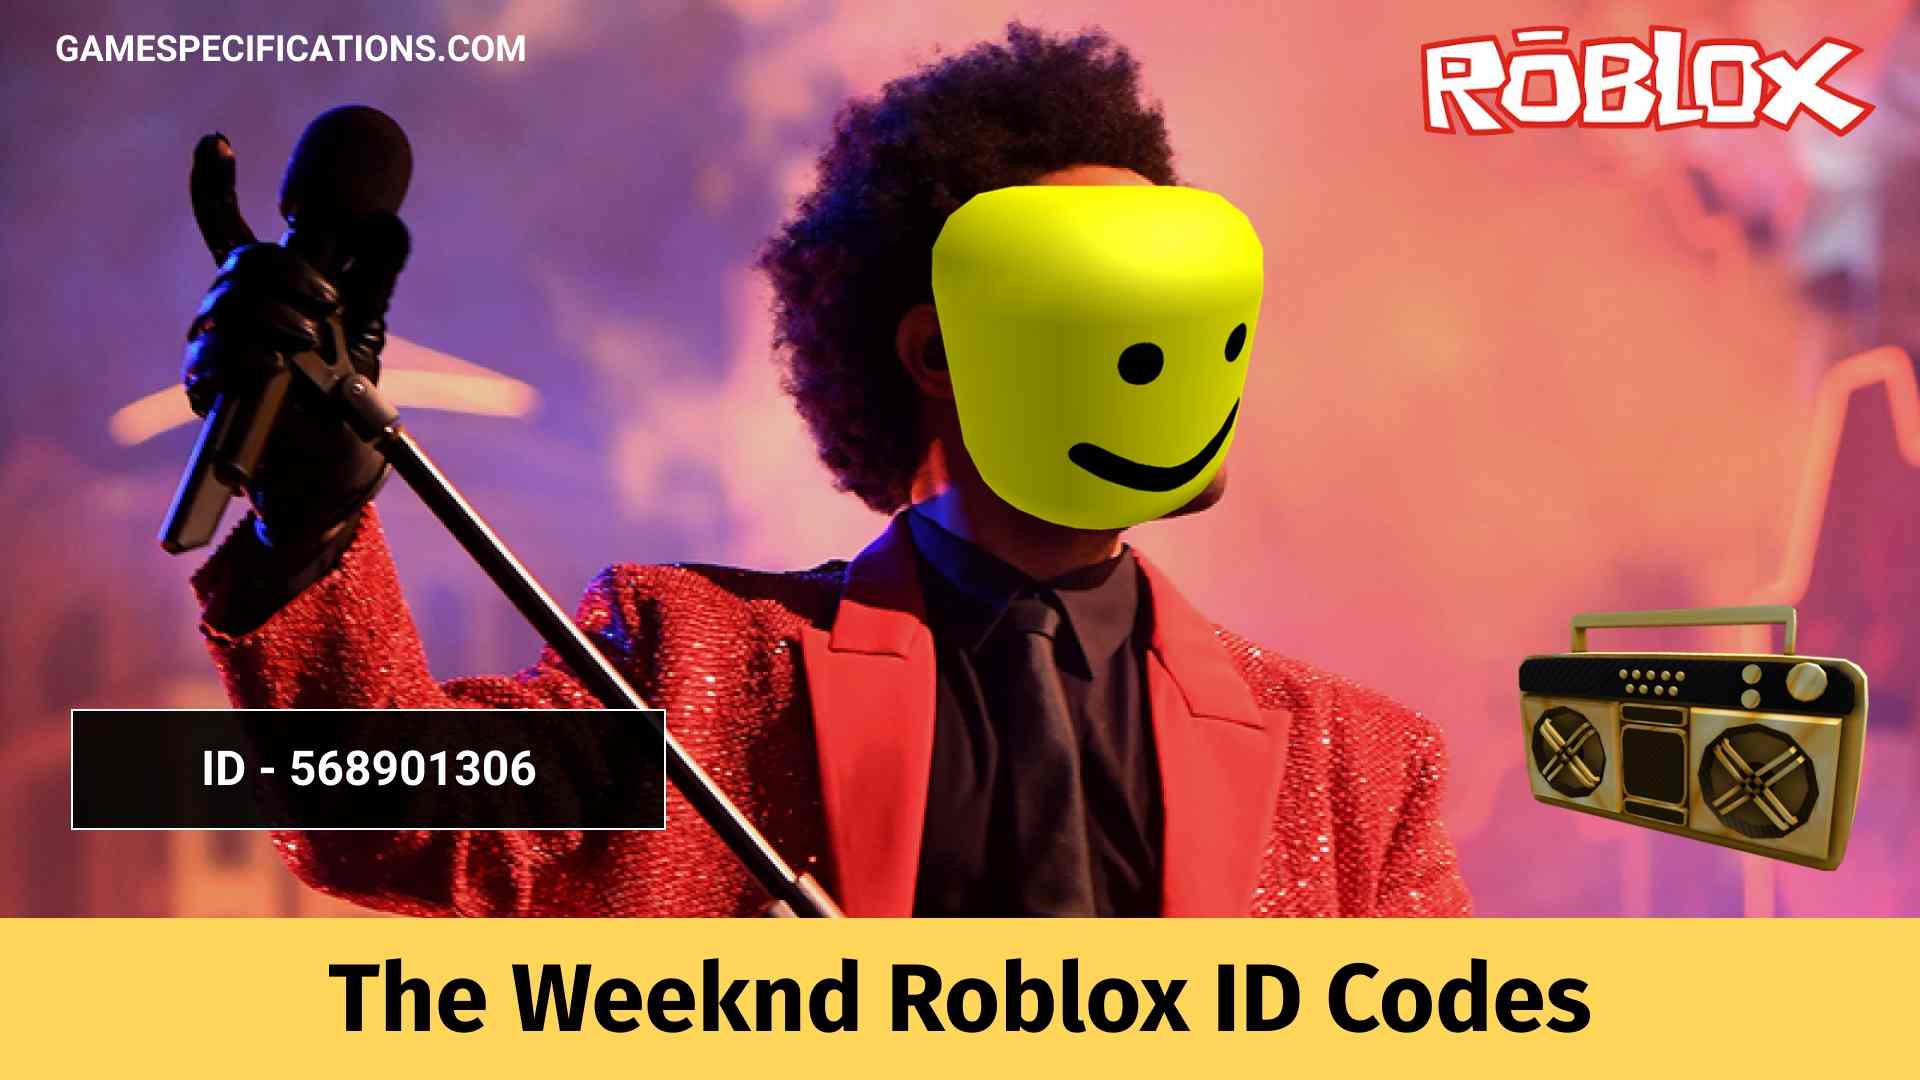 The Weeknd - Blinding Lights (Best Quality) Roblox ID - Roblox music codes